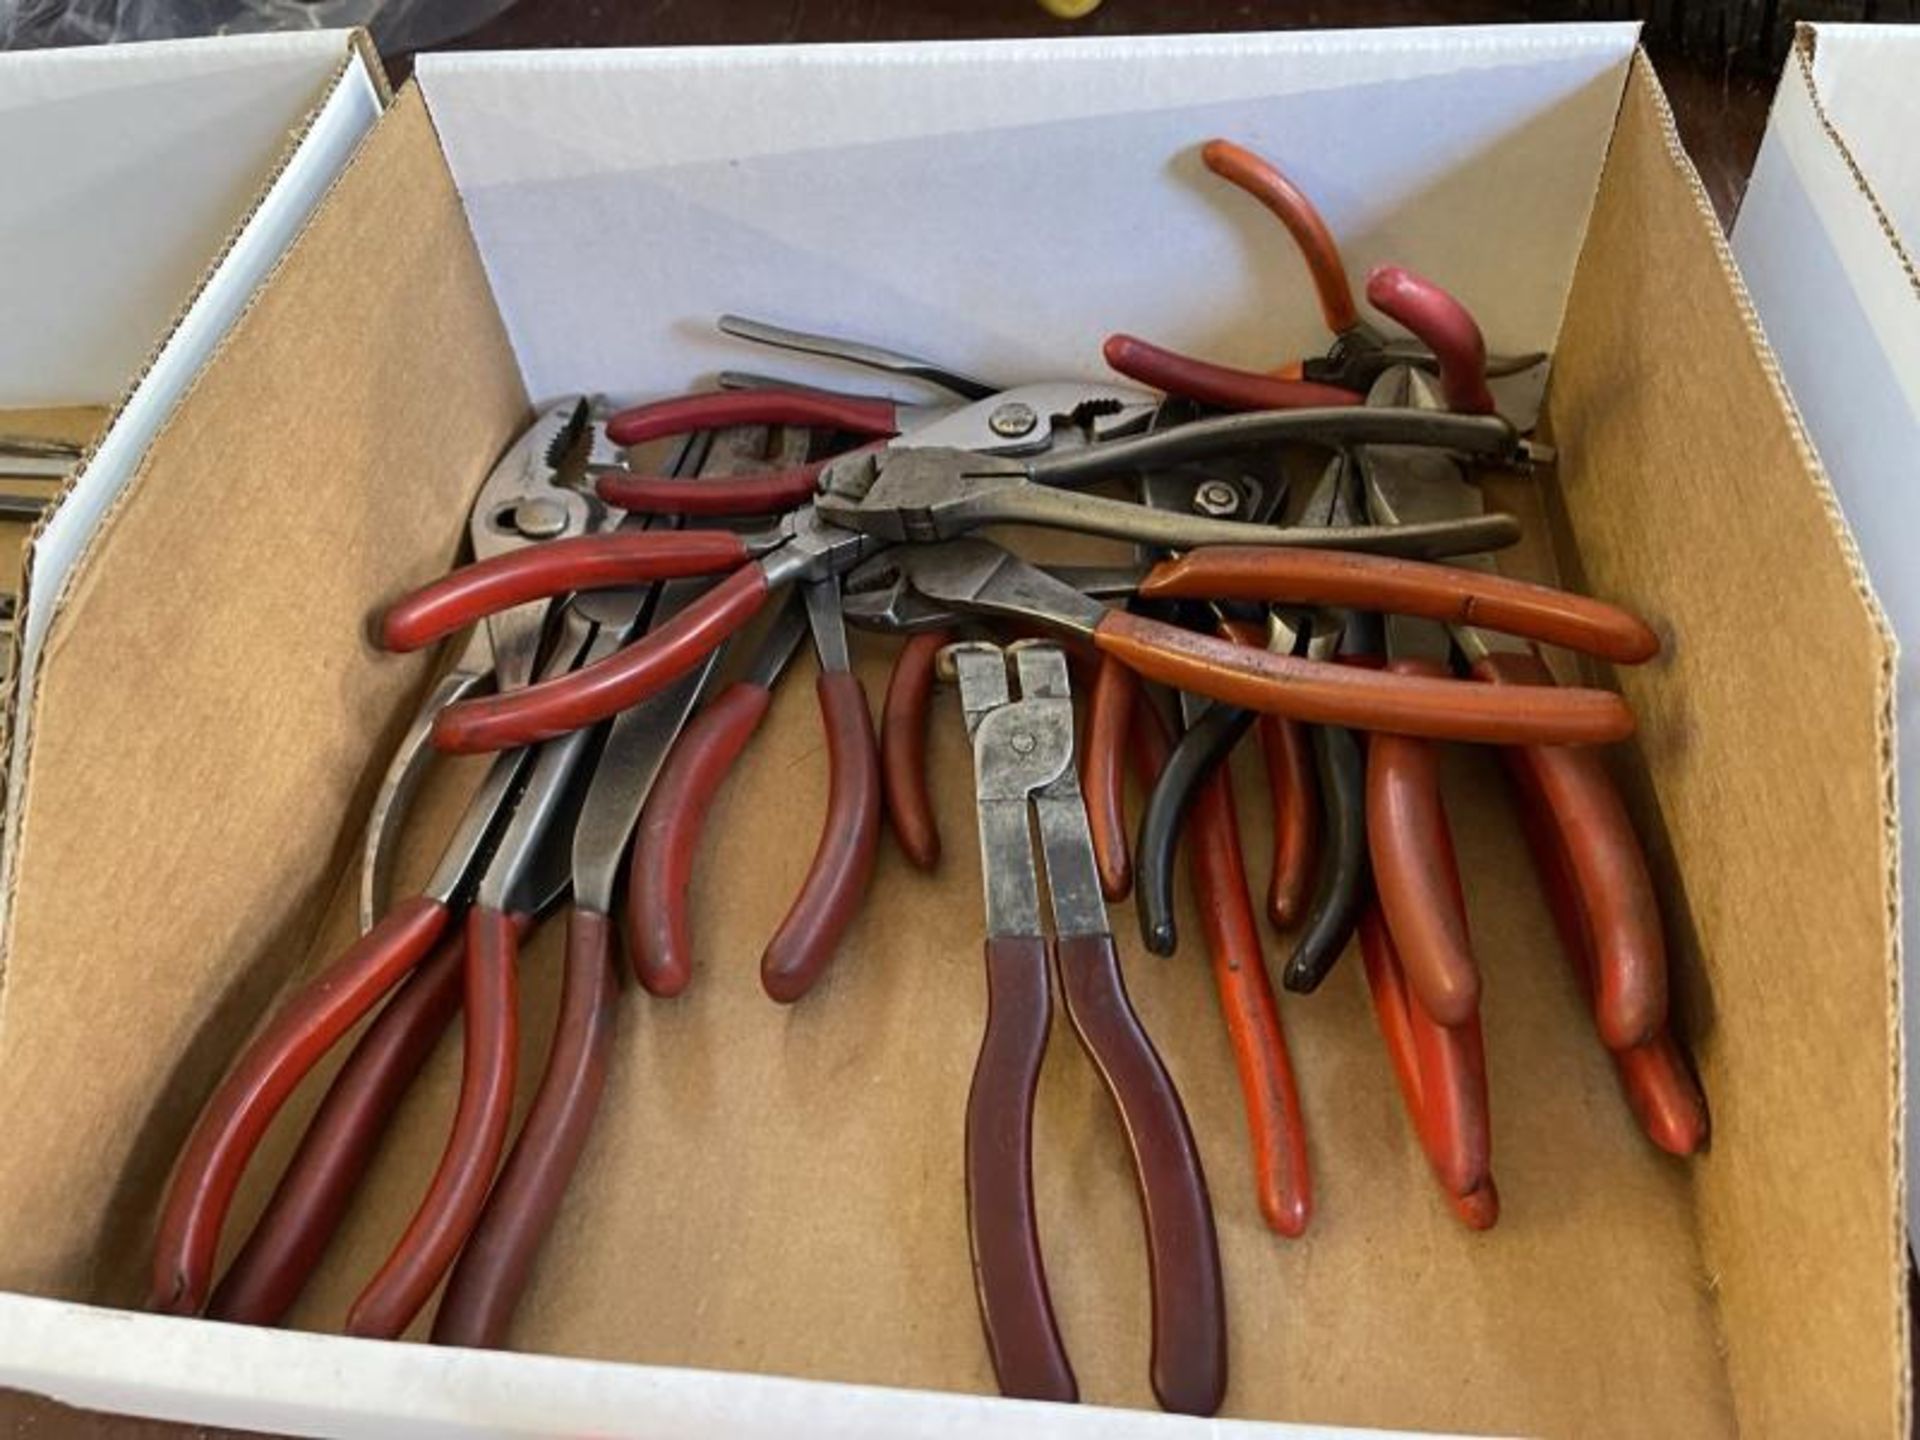 Pliers, Wire Cutter, Needle Nose Pliers